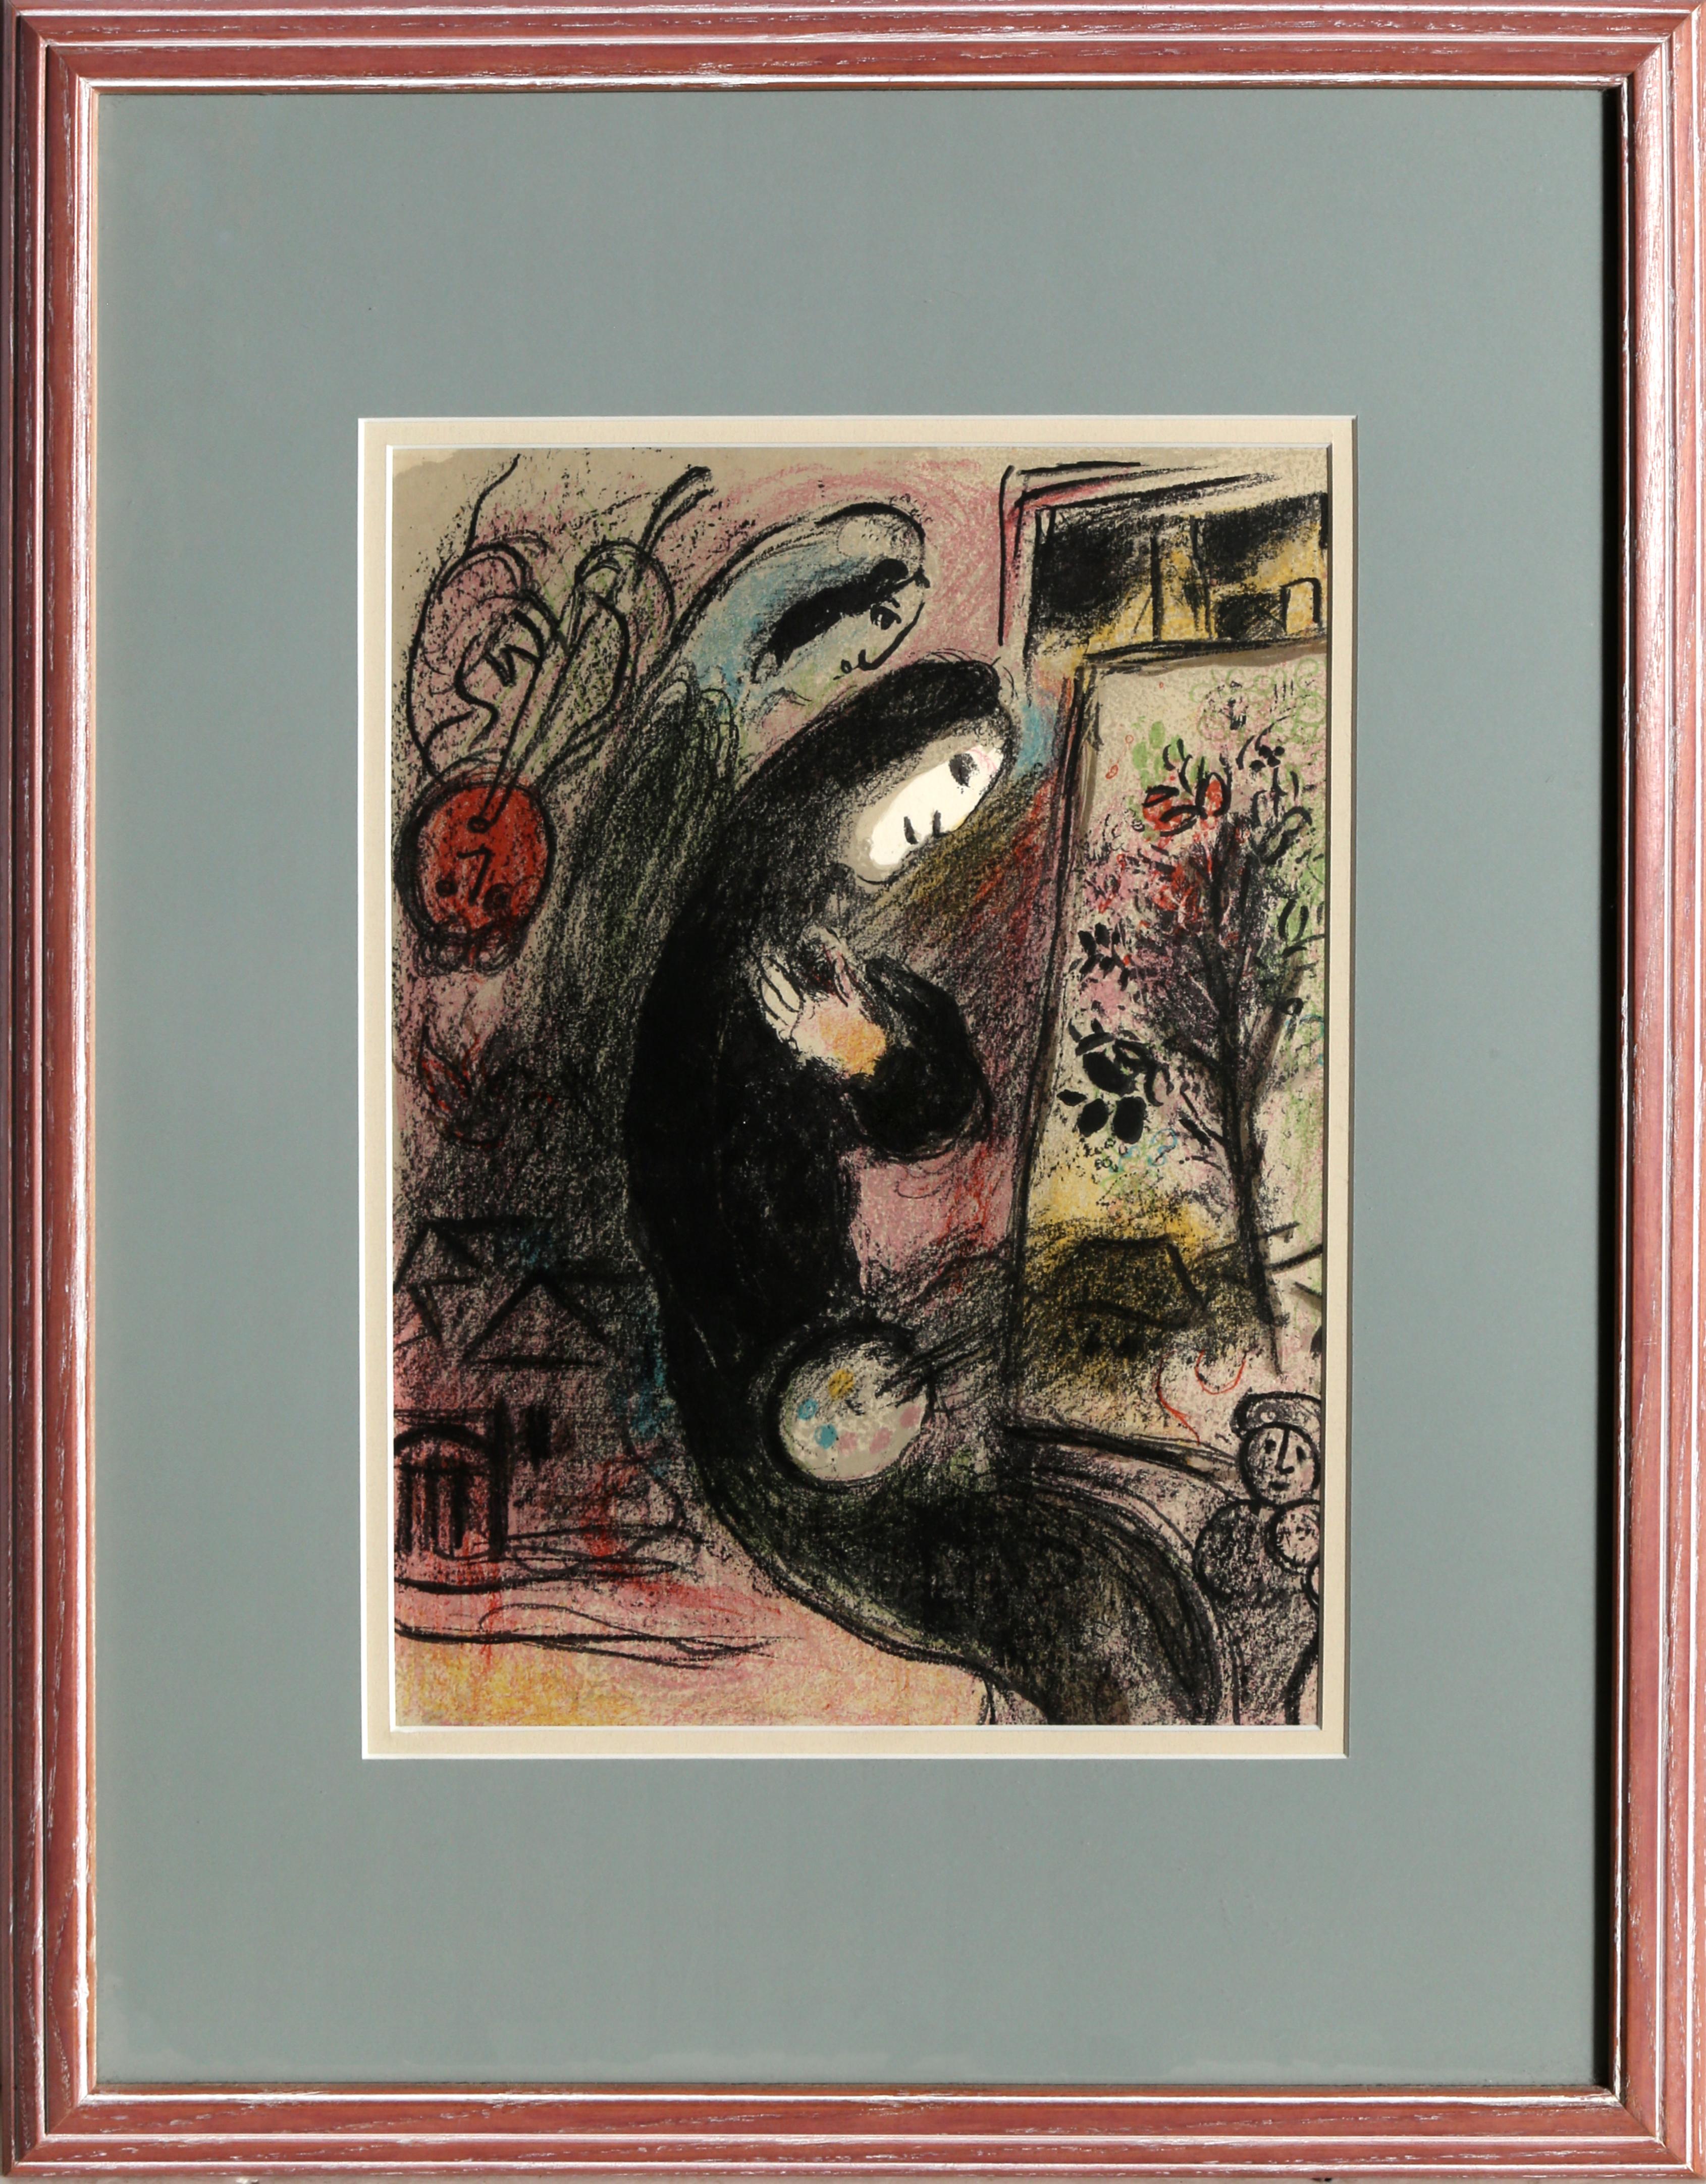 Inspiration, Lithograph by Marc Chagall 1963